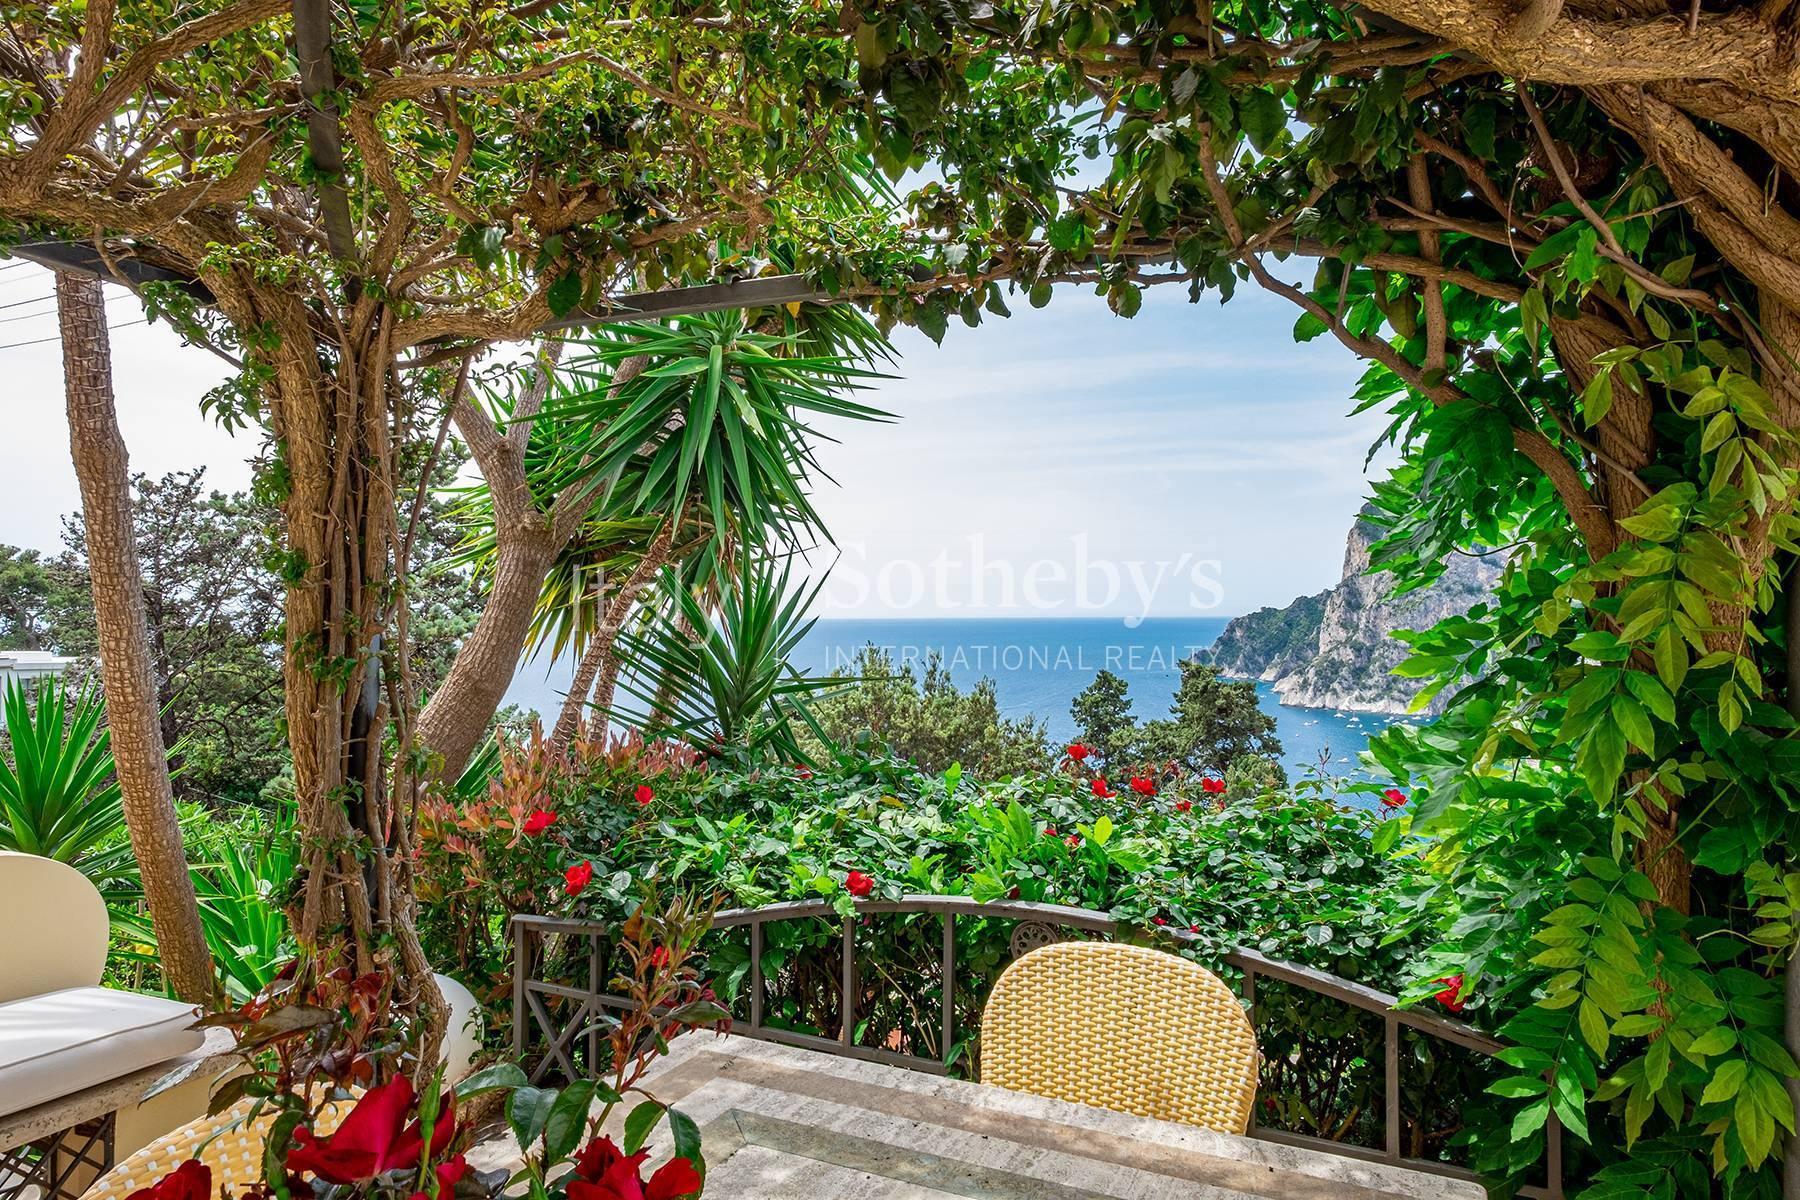 Villas for sale in Capri: a blend of history, glamor, and natural beauty -  IB International Real Estate